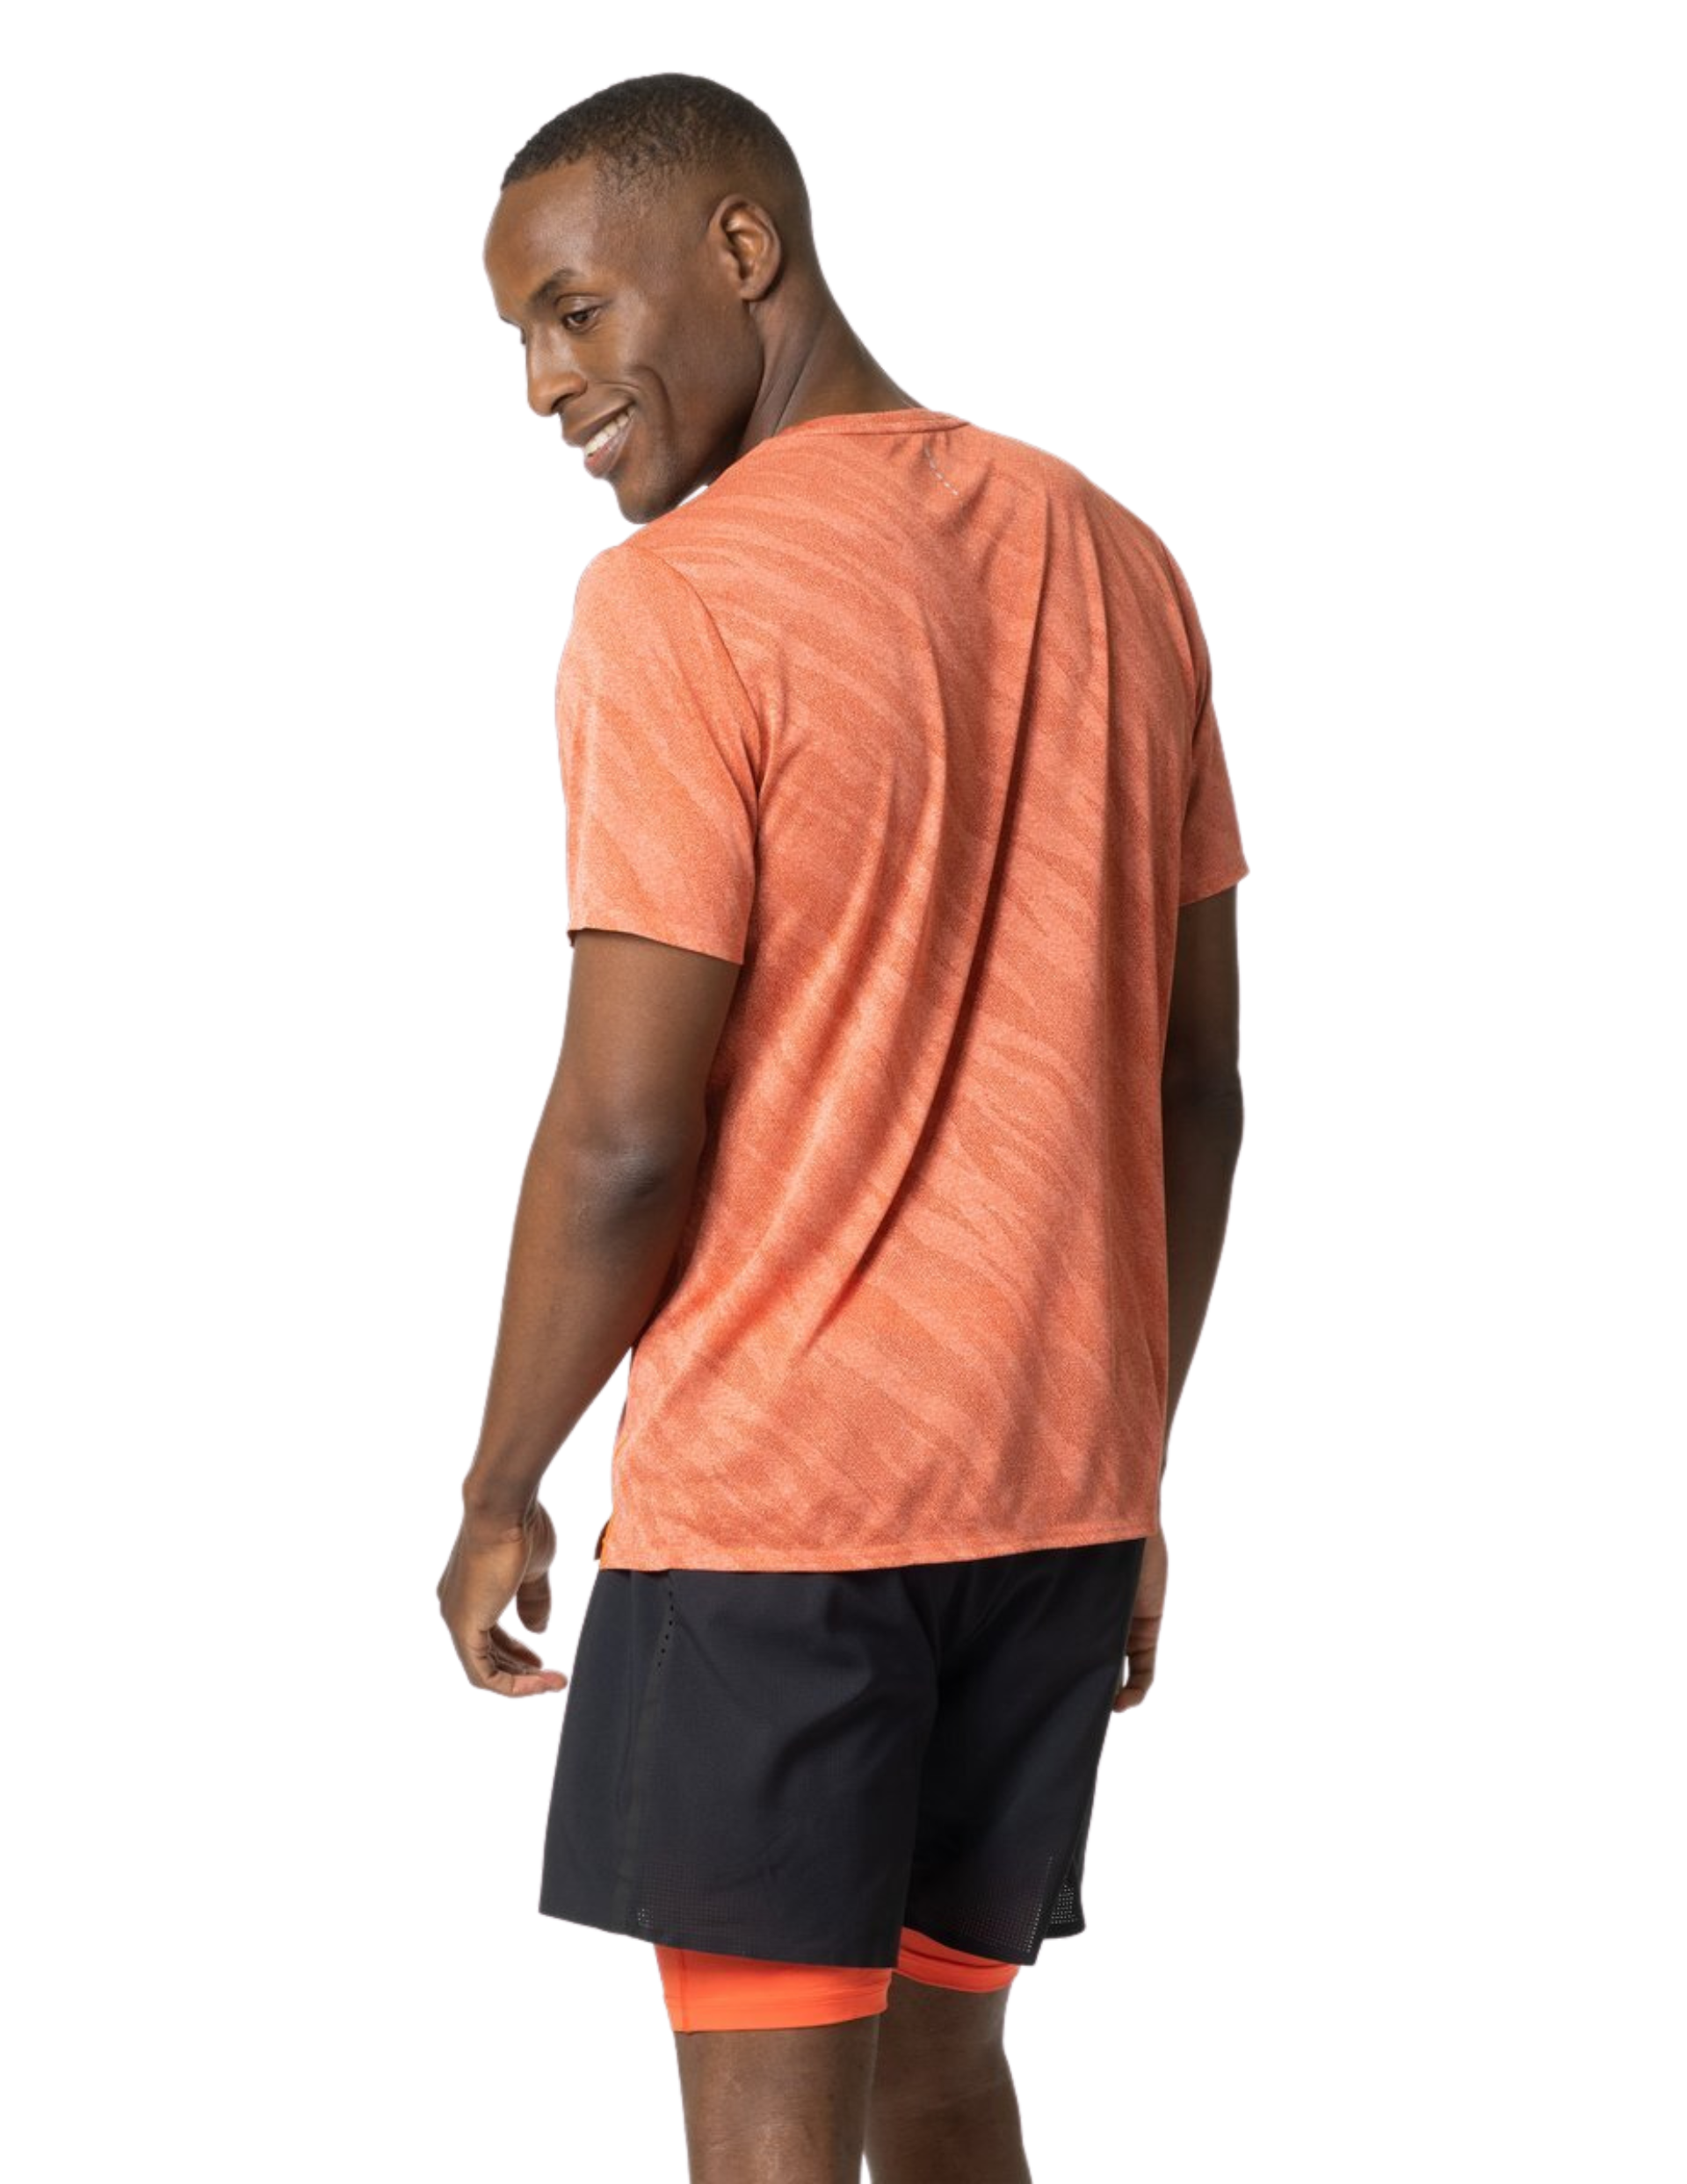 T-Shirt de Running Odlo Zeroweight Engineered Chill-Tec Manches Courtes Homme